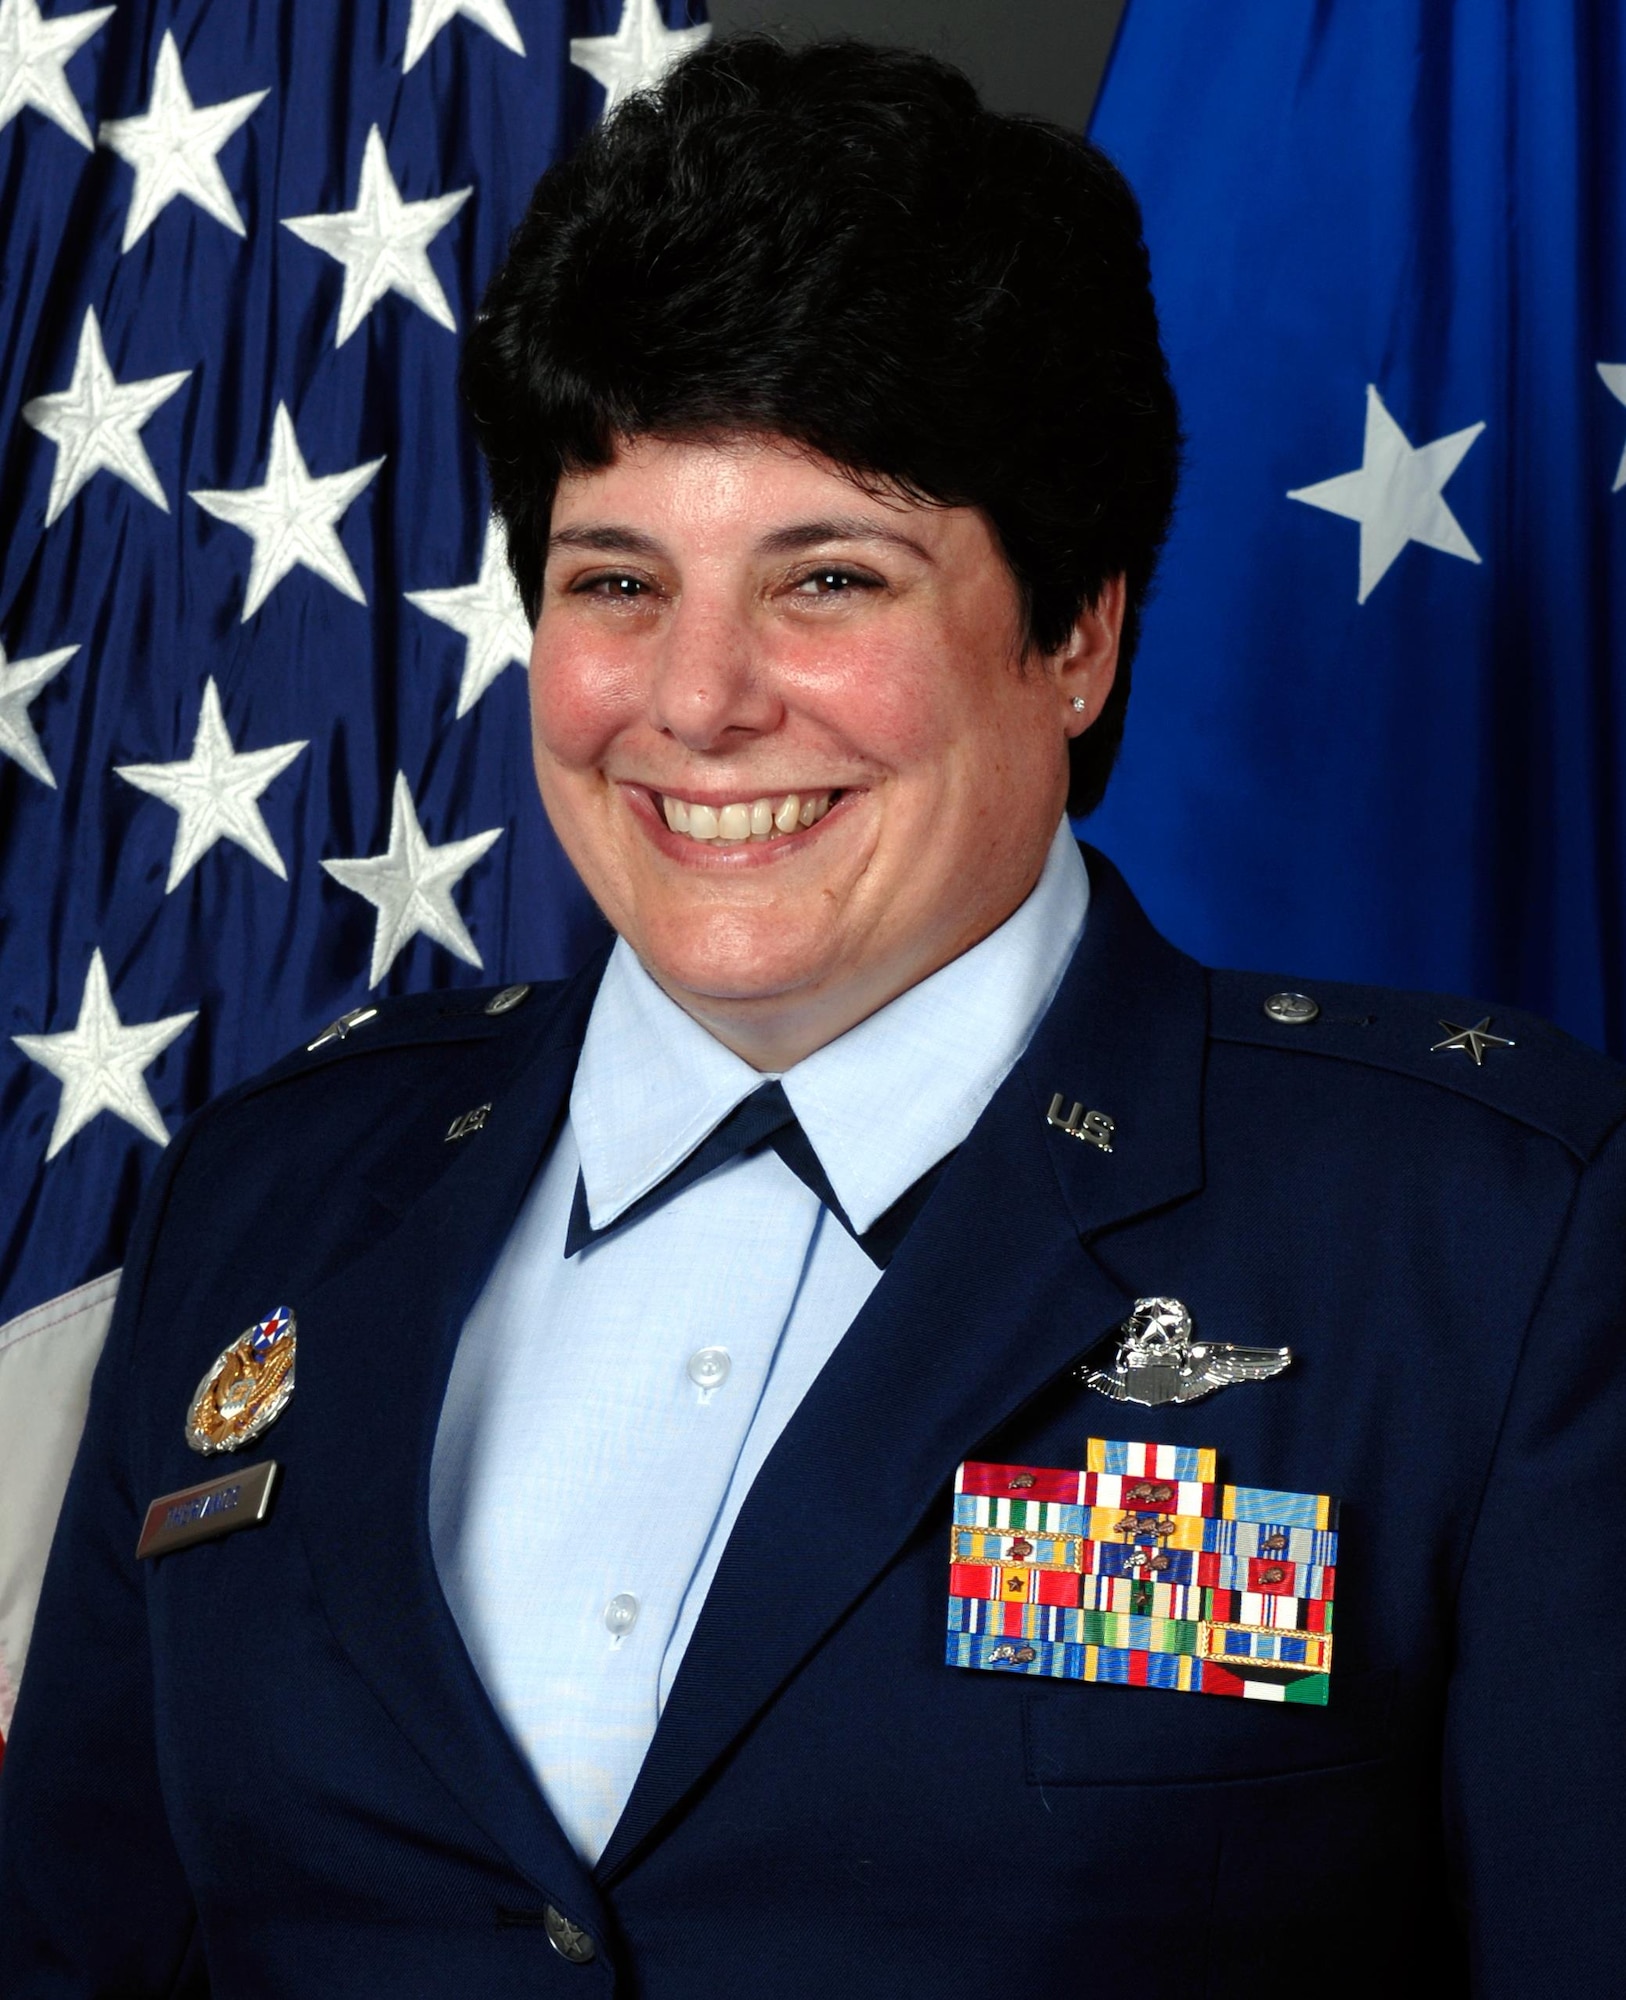 Janet Therianos, a 1980 graduate of the U.S. Air Force Academy, was the first woman to graduate the Academy and be selected for promotion to the flag officer ranks. (U.S. Air Force photo) 
